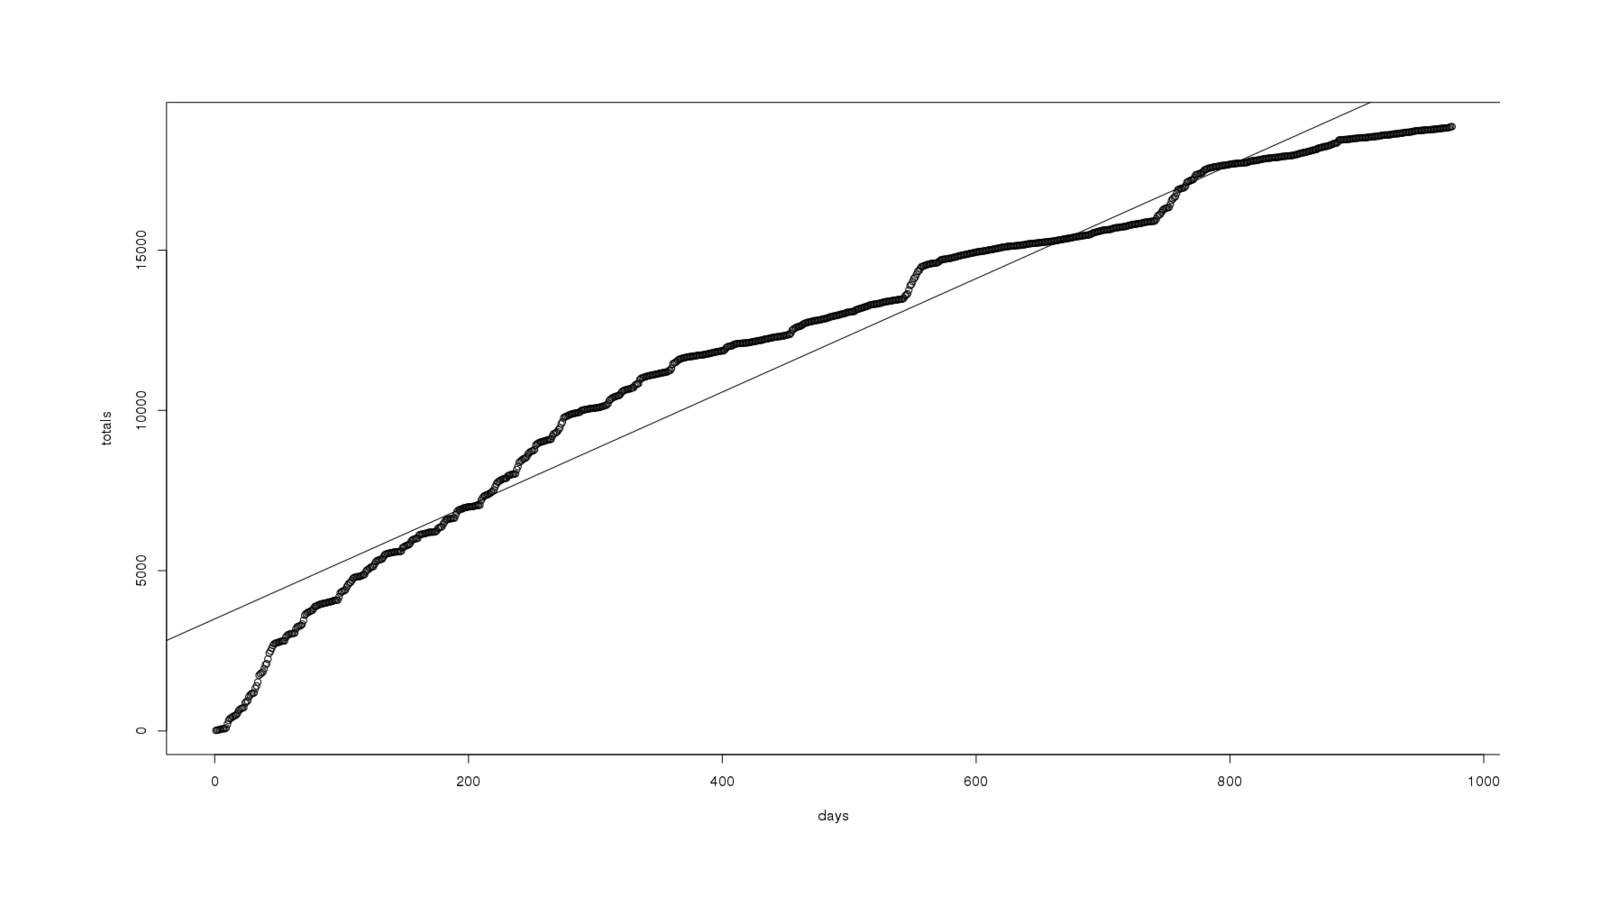 Total cumulative MoR reviews as a function of time, with linear fit